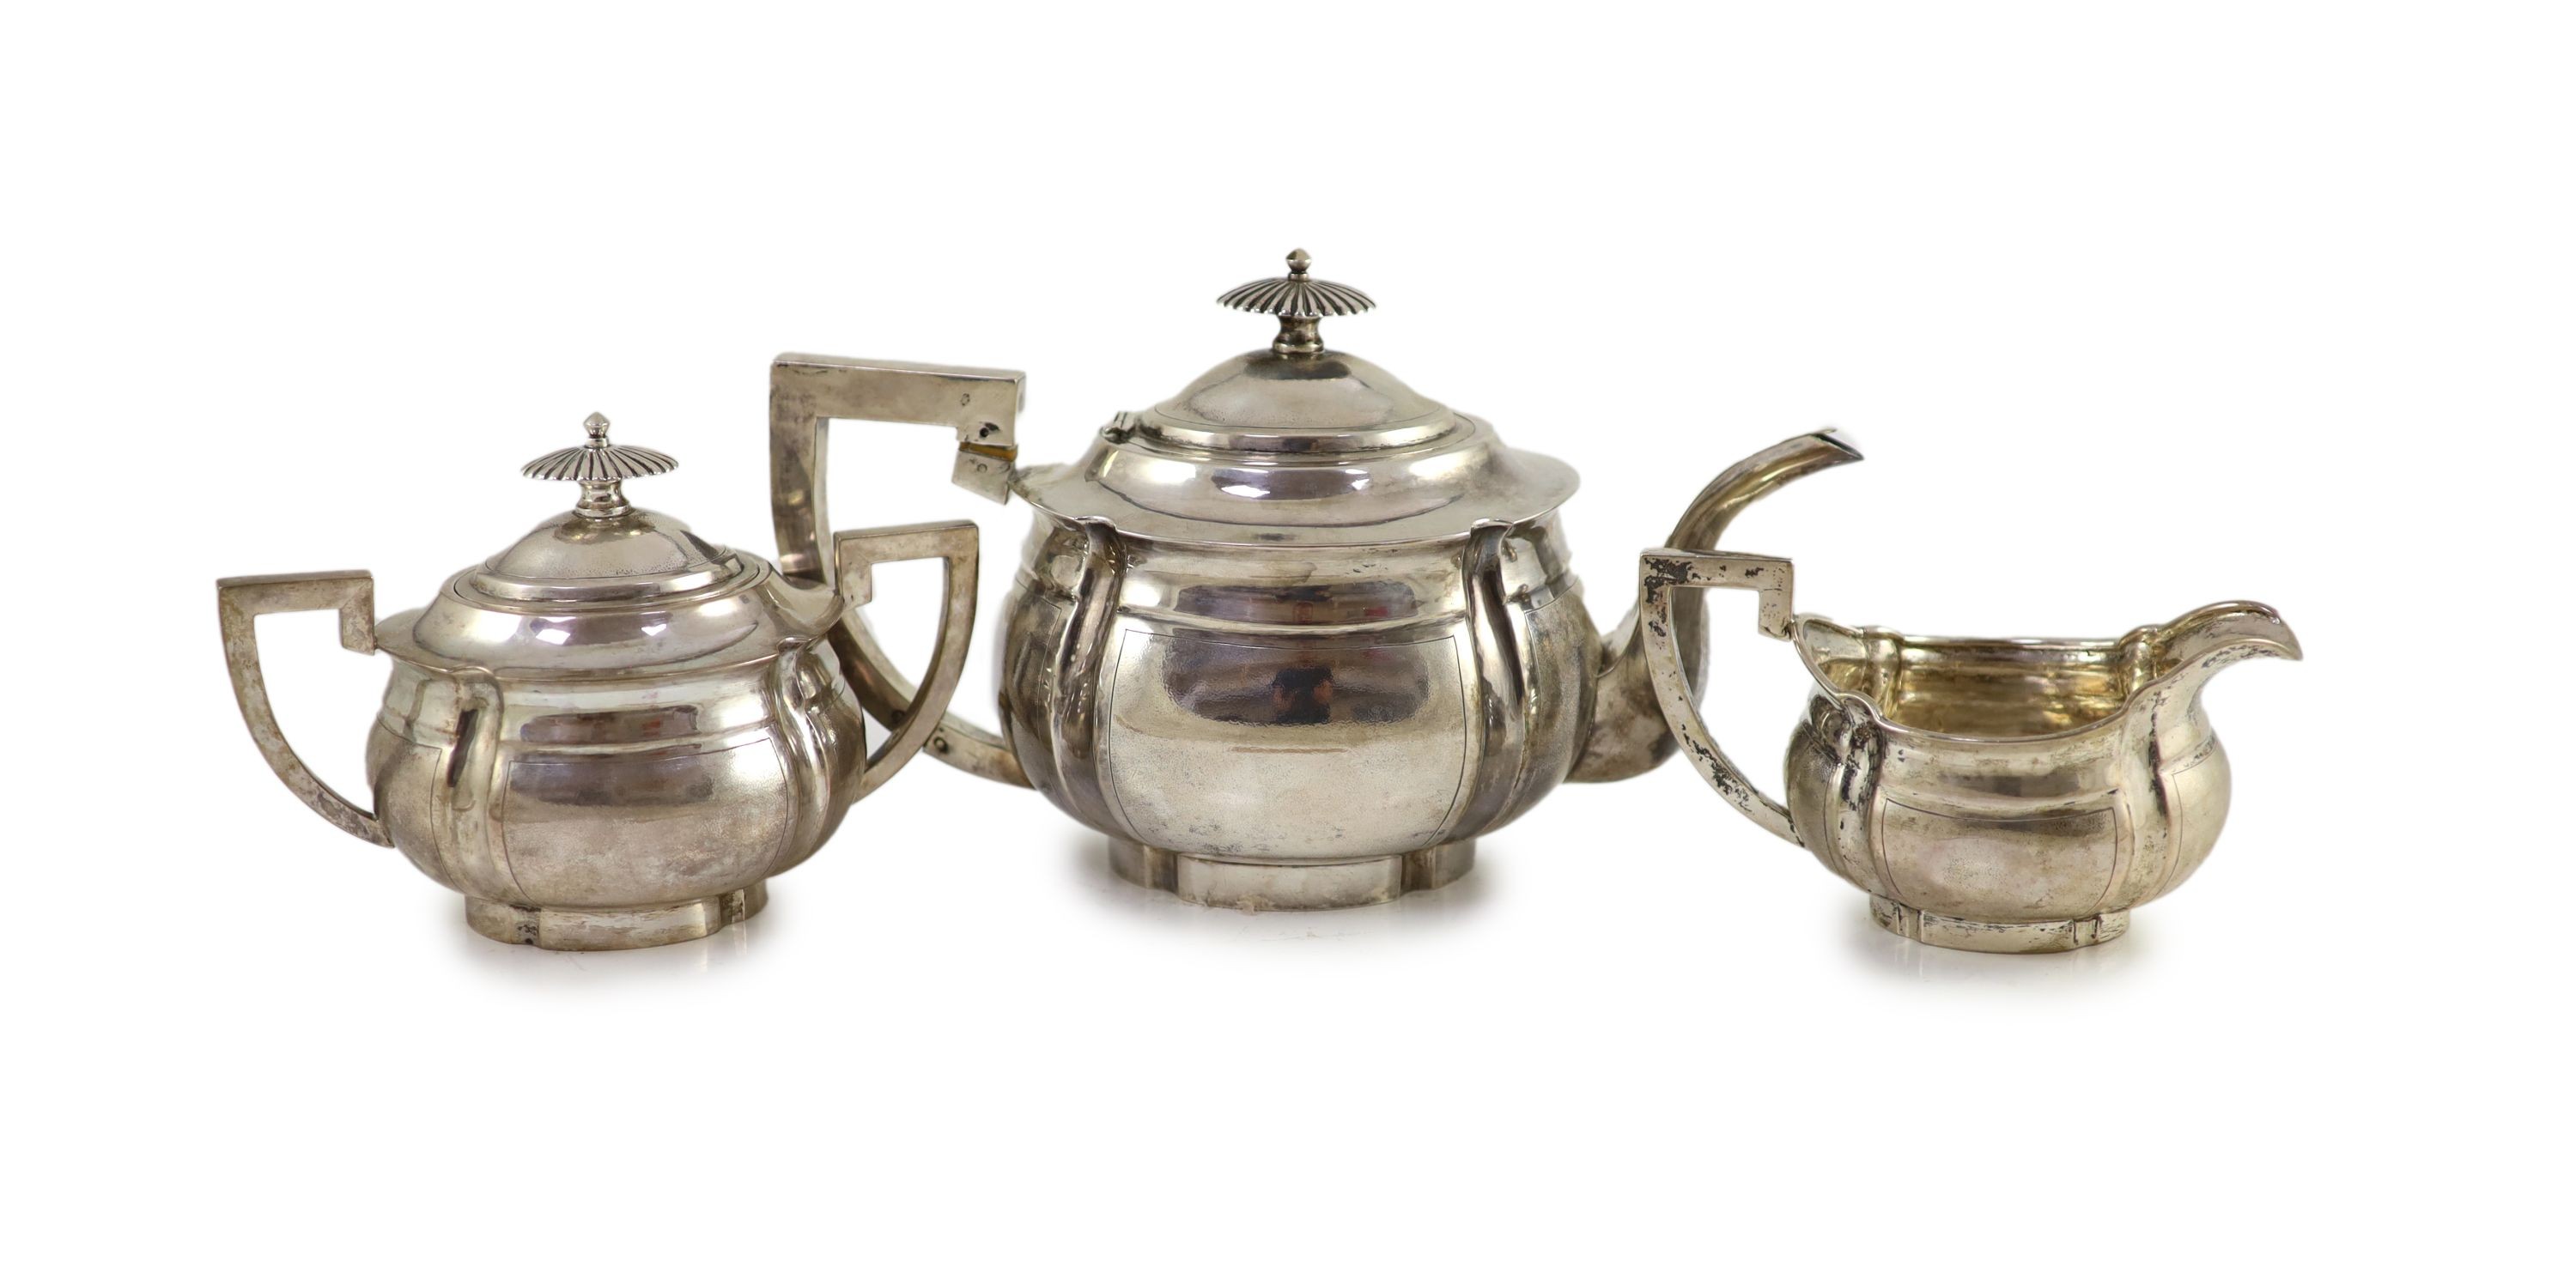 An early 20th century Chinese white metal three piece tea set by Zee Wo